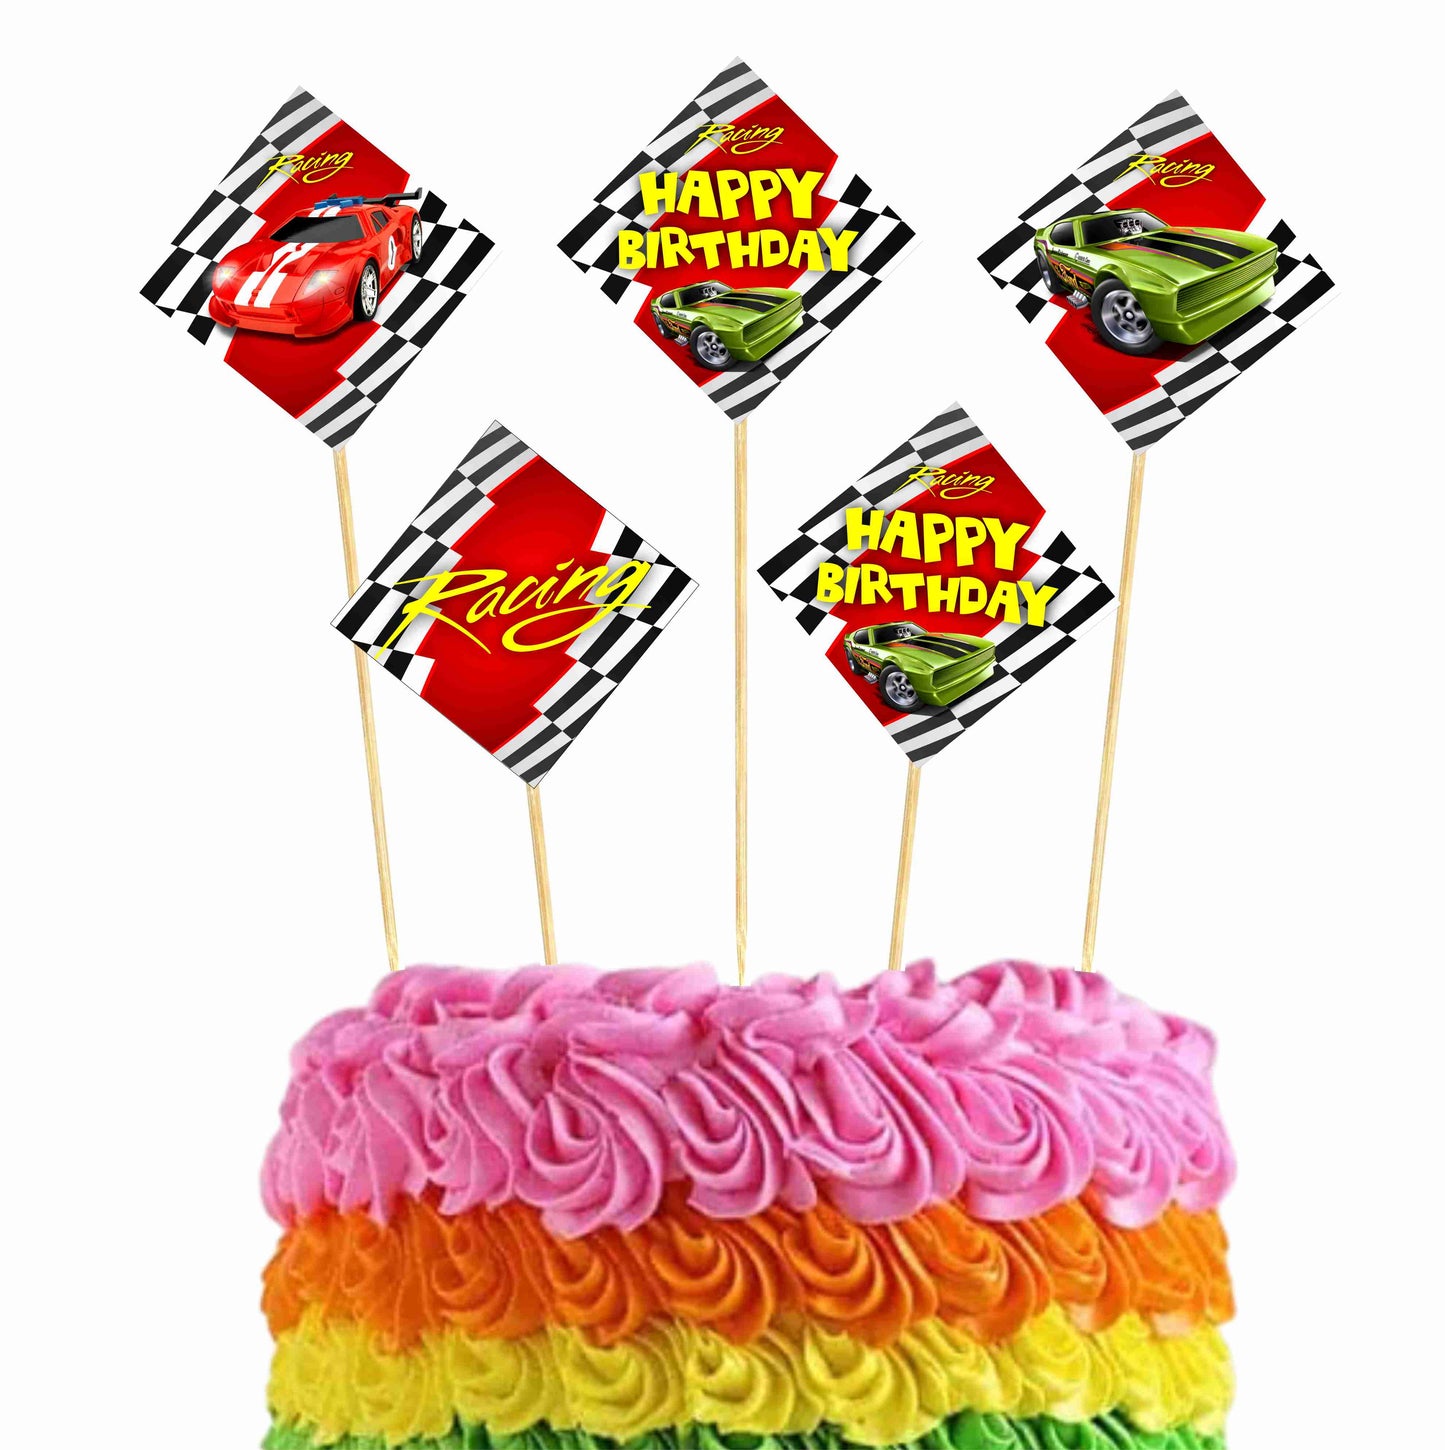 Sports Car Theme Cake Topper Pack of 10 Nos for Birthday Cake Decoration Theme Party Item For Boys Girls Adults Birthday Theme Decor